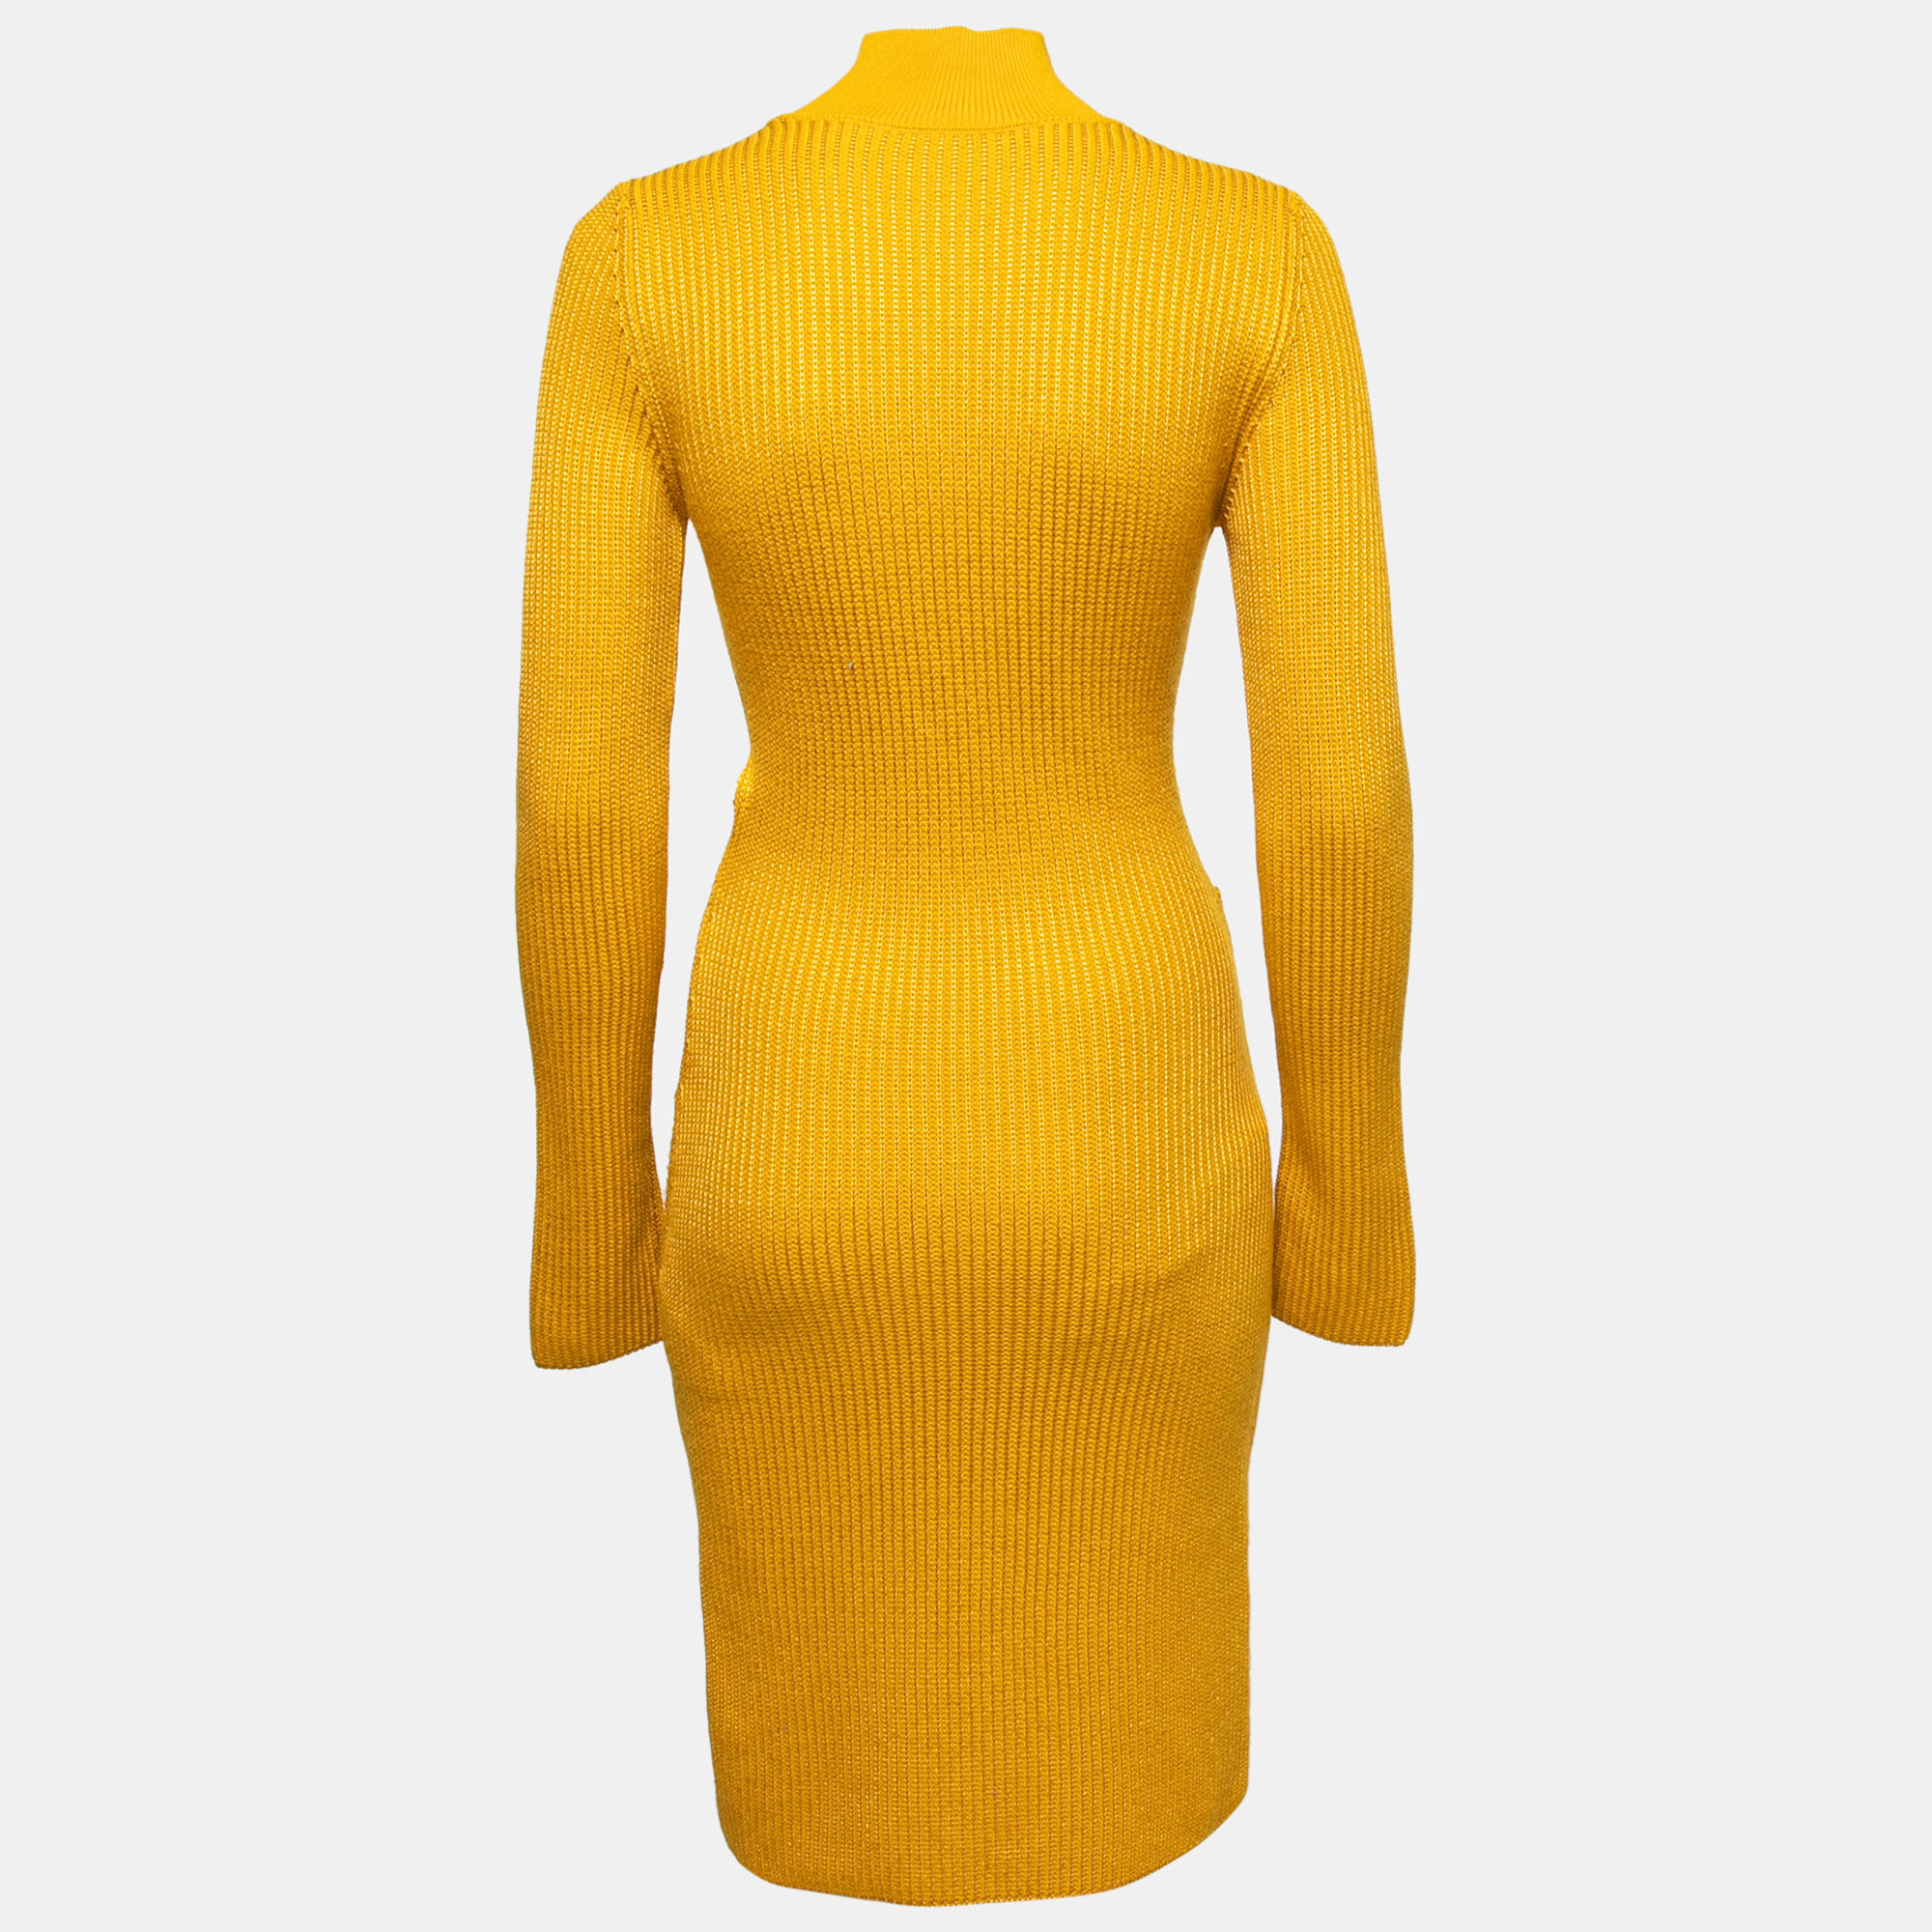 

Roberto Cavalli Yellow Anatomical Rib Knit Crossover Cut-Out Detail Dress